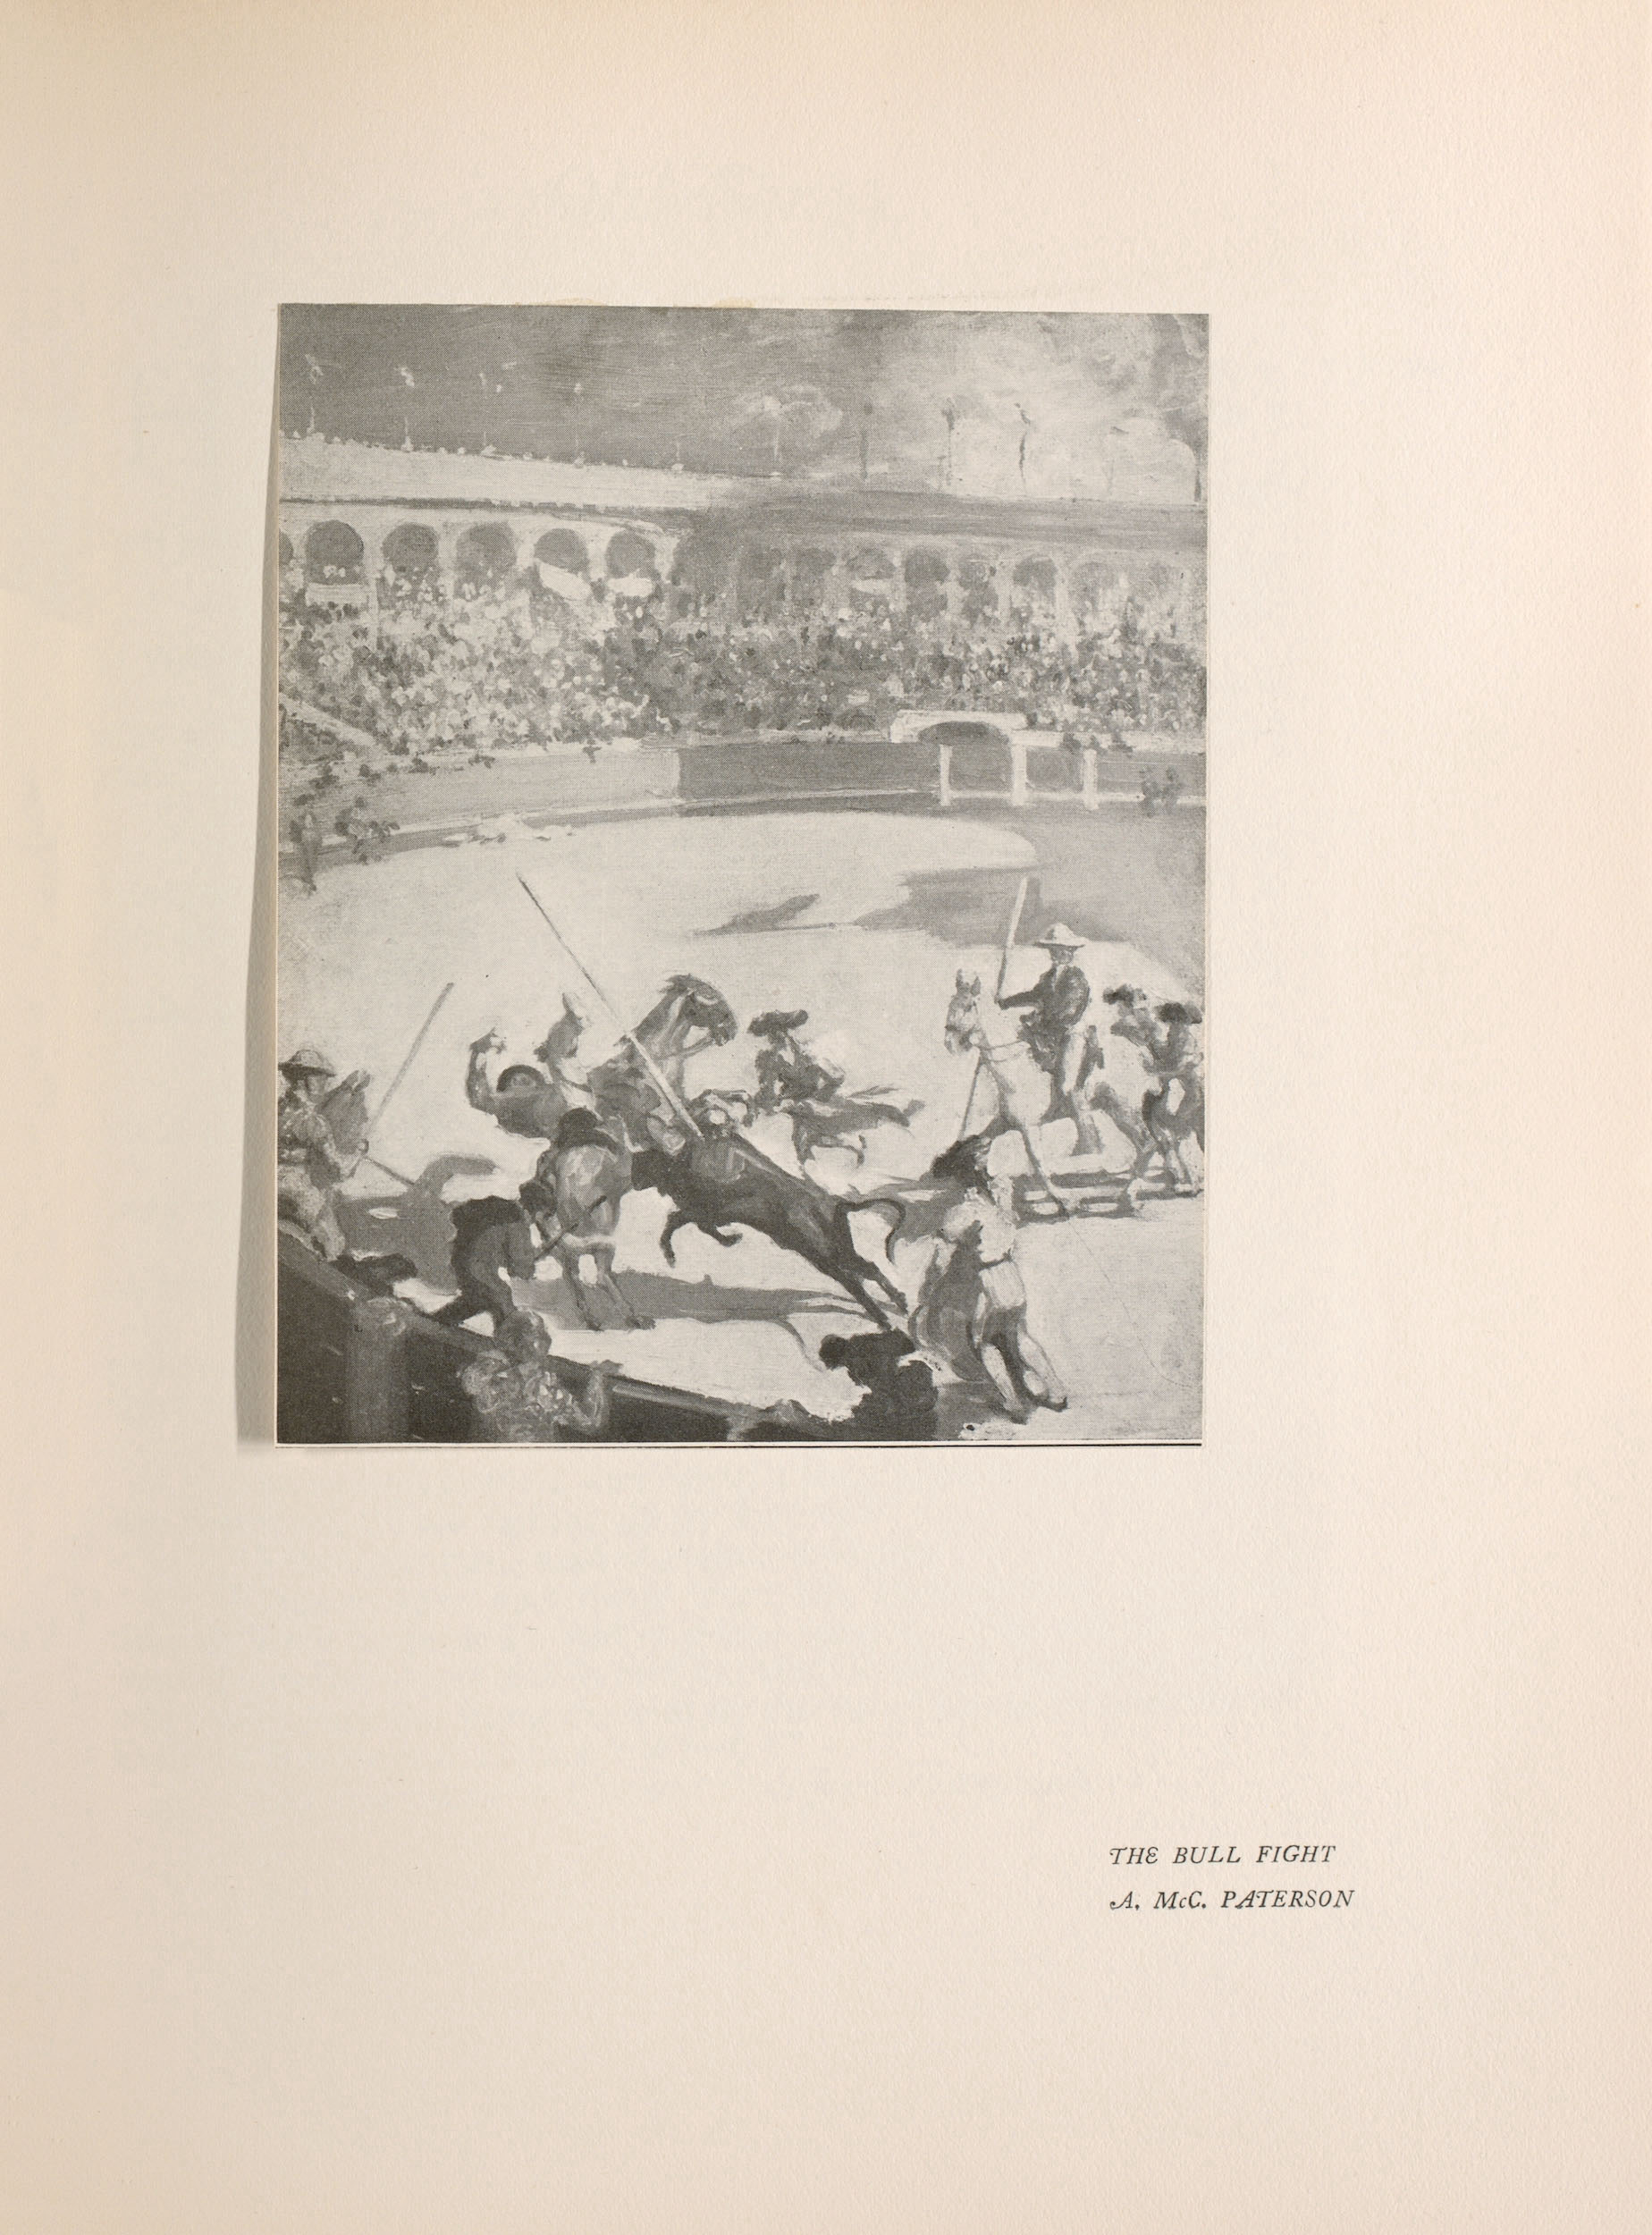 The tonal image is in portrait orientation and is positioned in the upper left center of the page. In a large, crowded amphitheater, two men on horses surround a matador fighting a black bull. The man on the left is mounted on a white horse and is holding a spear or staff in the air. The man on the right is in the act of falling off of a dark horse. The bull is between them. A man stands behind the bull with a whip. In the extreme foreground, two men who appear to be guards are standing next to each other observing the scene. There are two men on horses in the bottom left corner of the image.